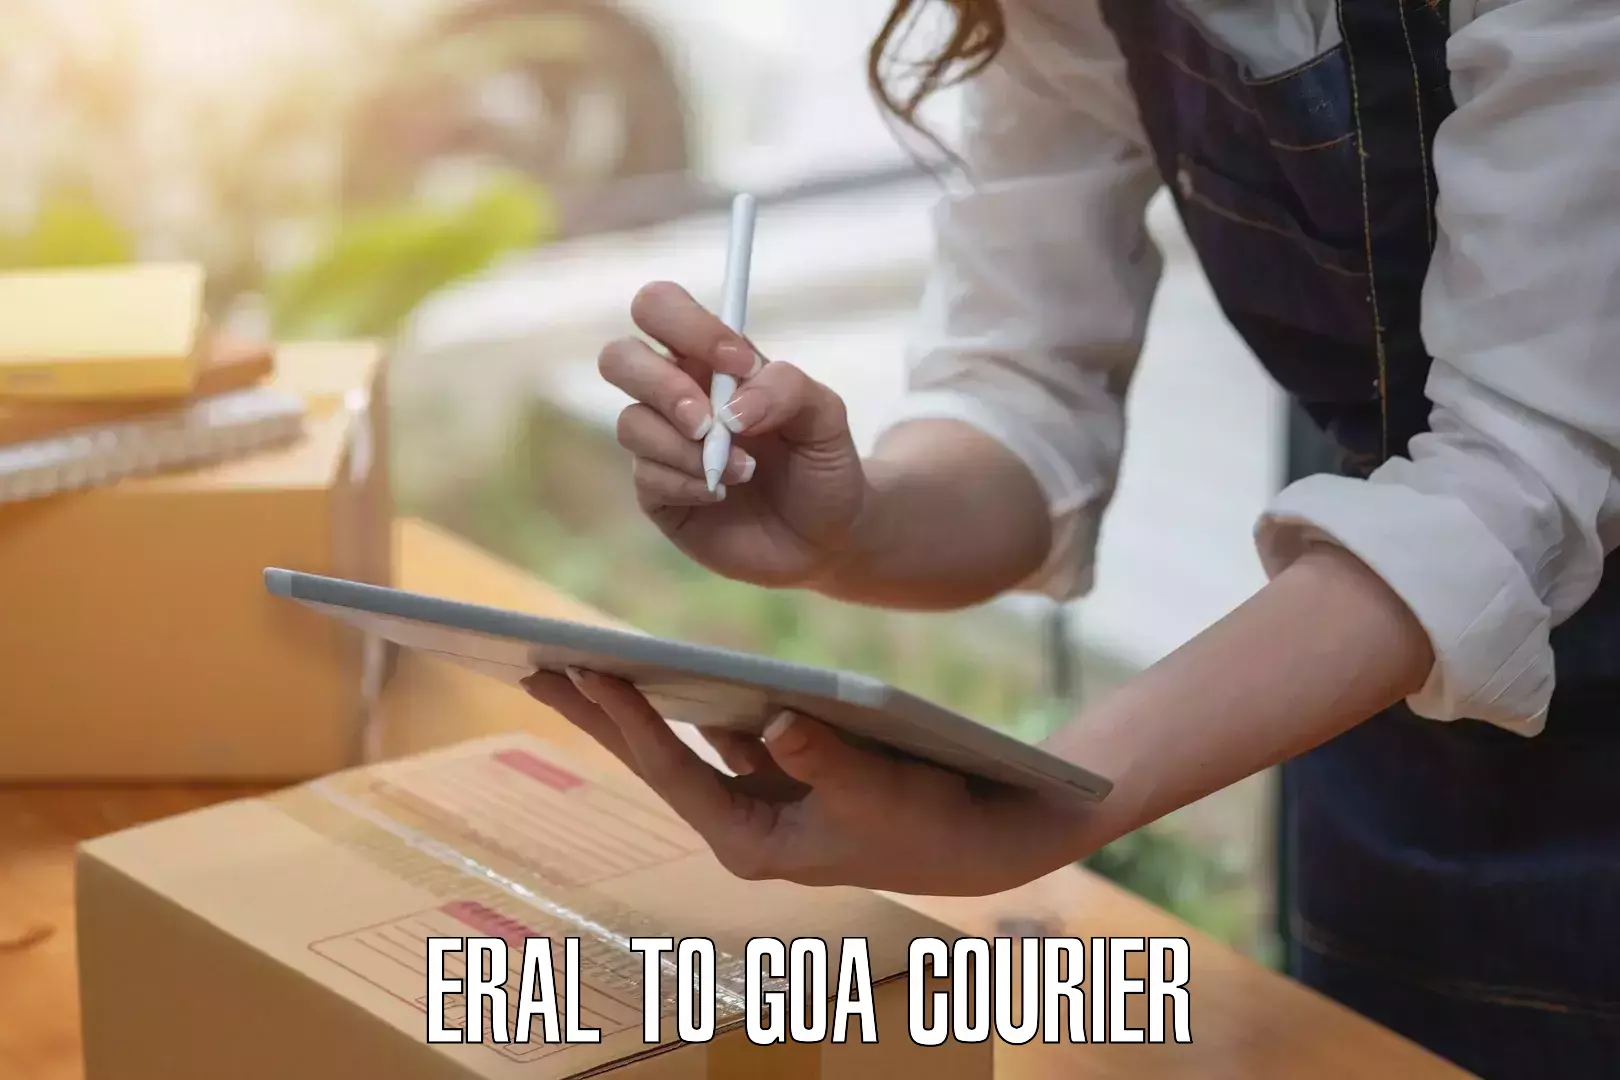 Baggage transport innovation Eral to South Goa